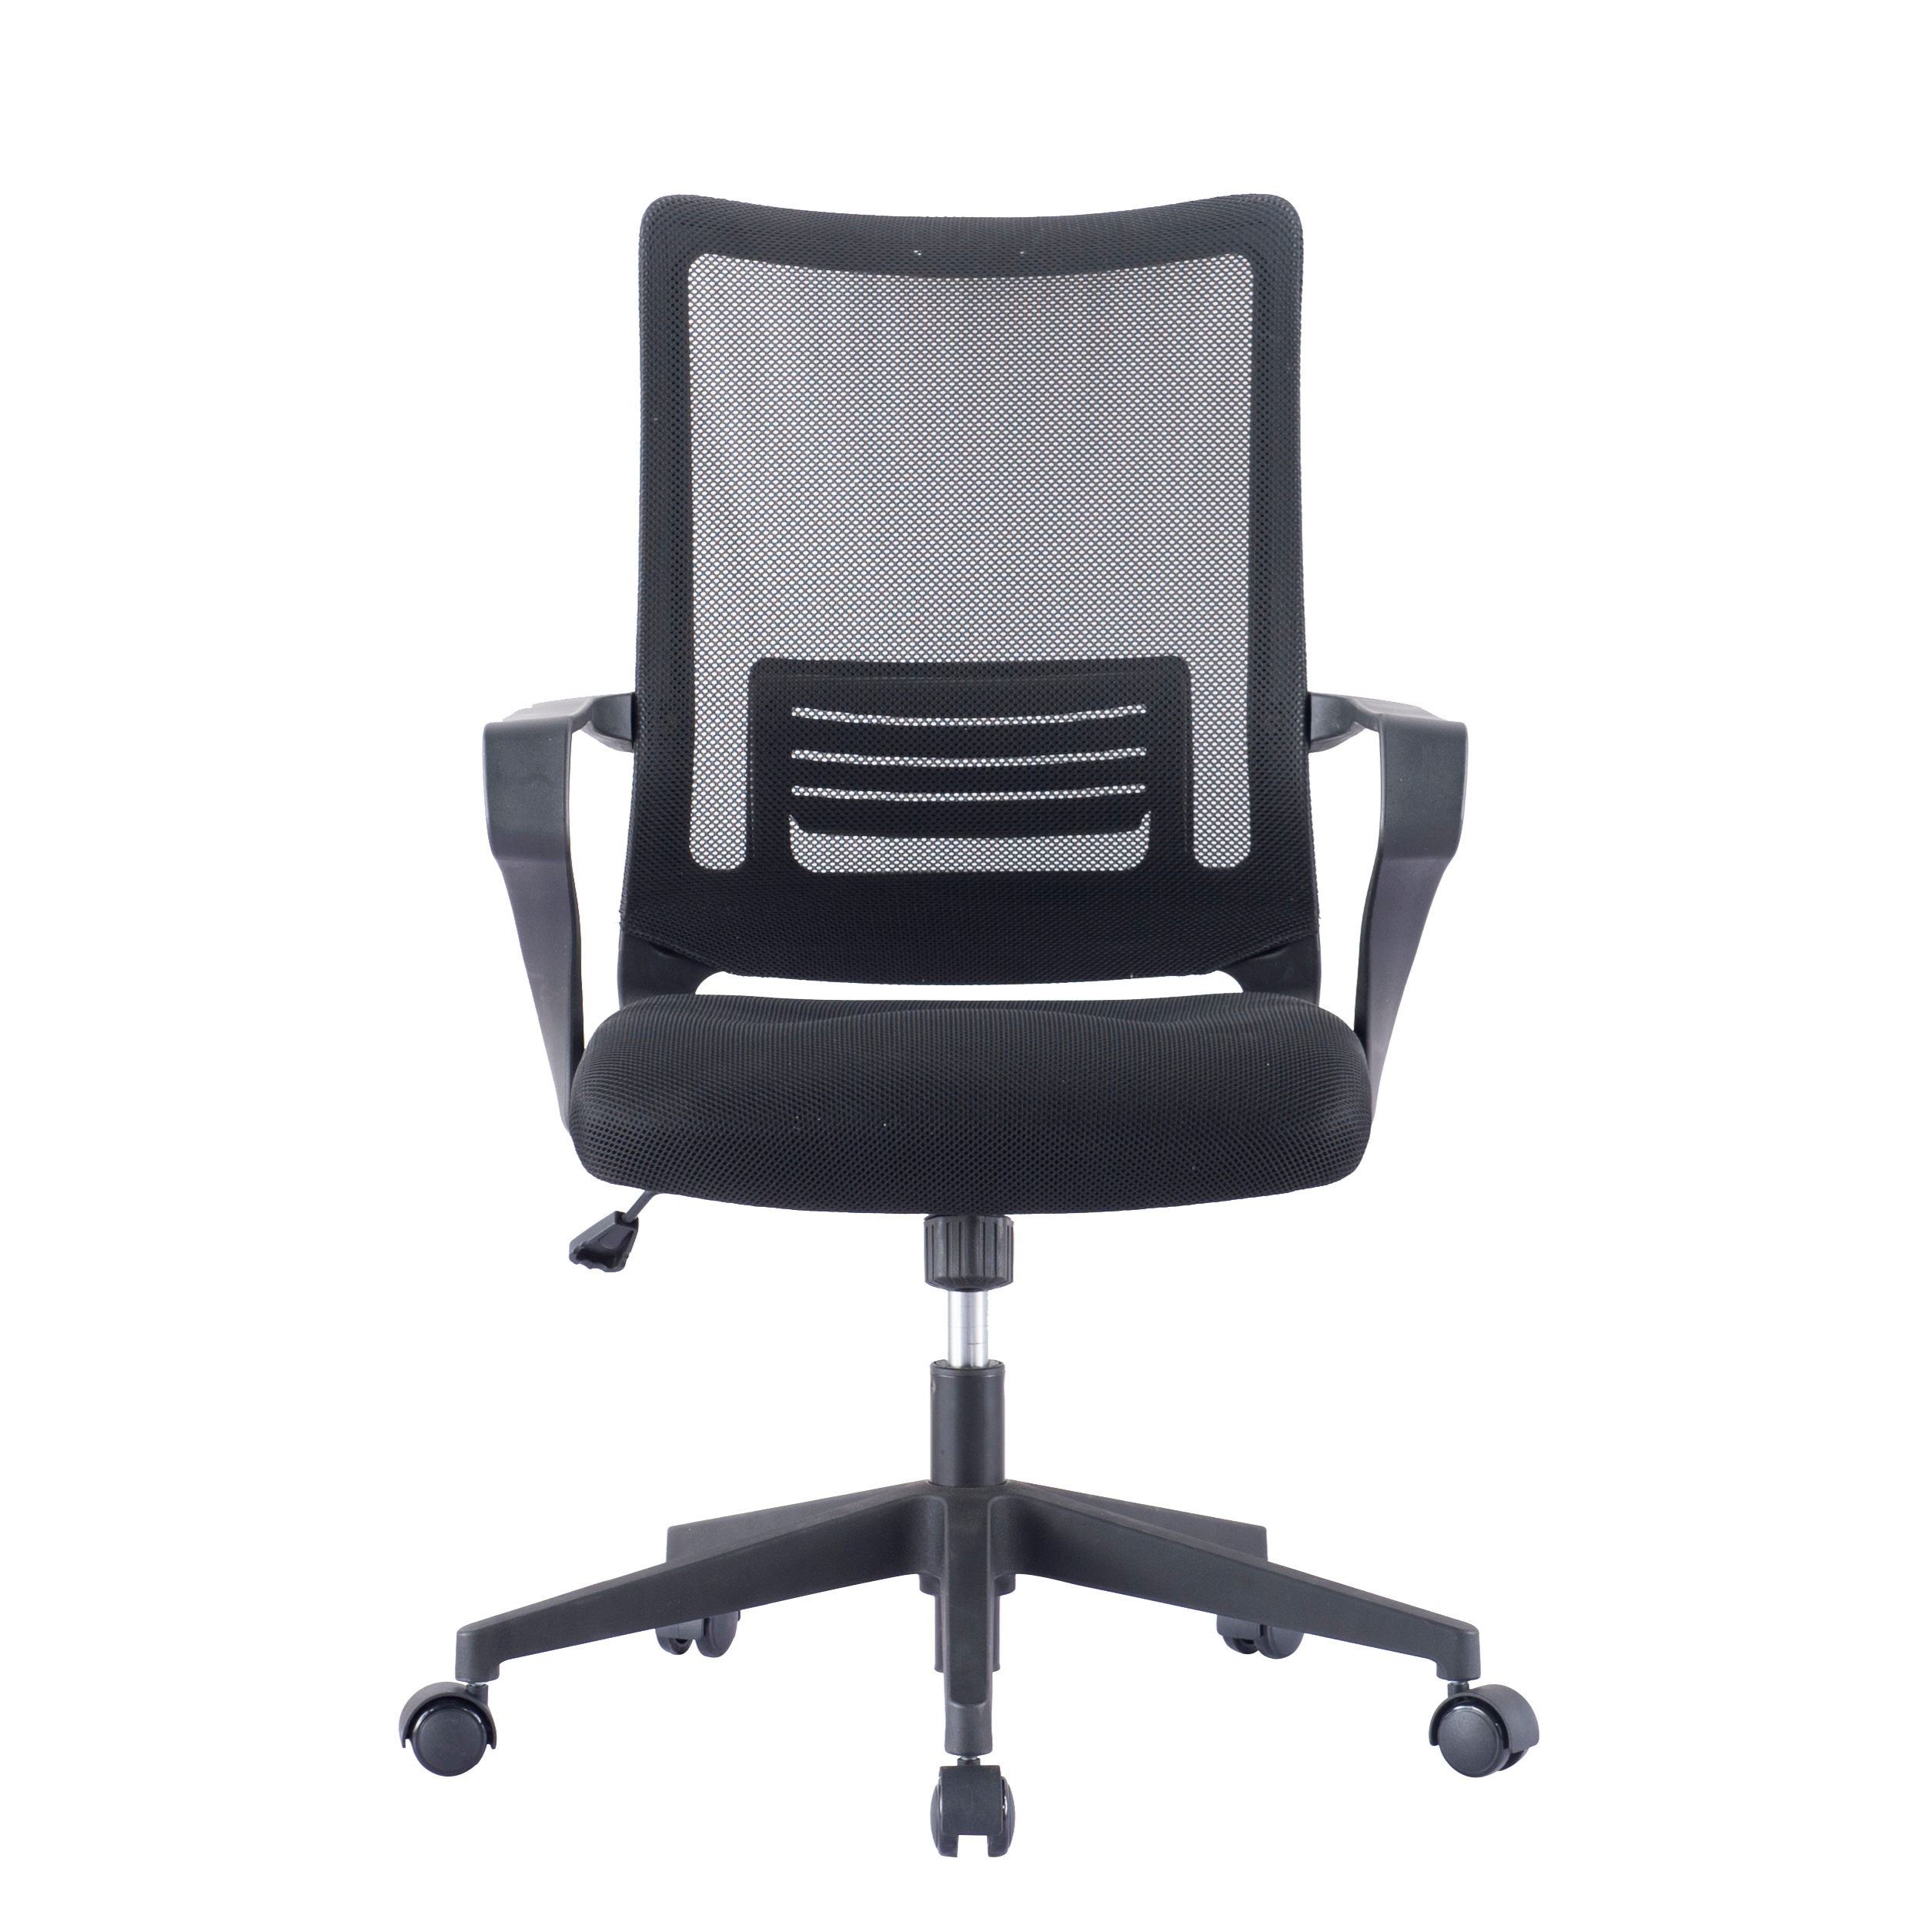 backrest for office chair